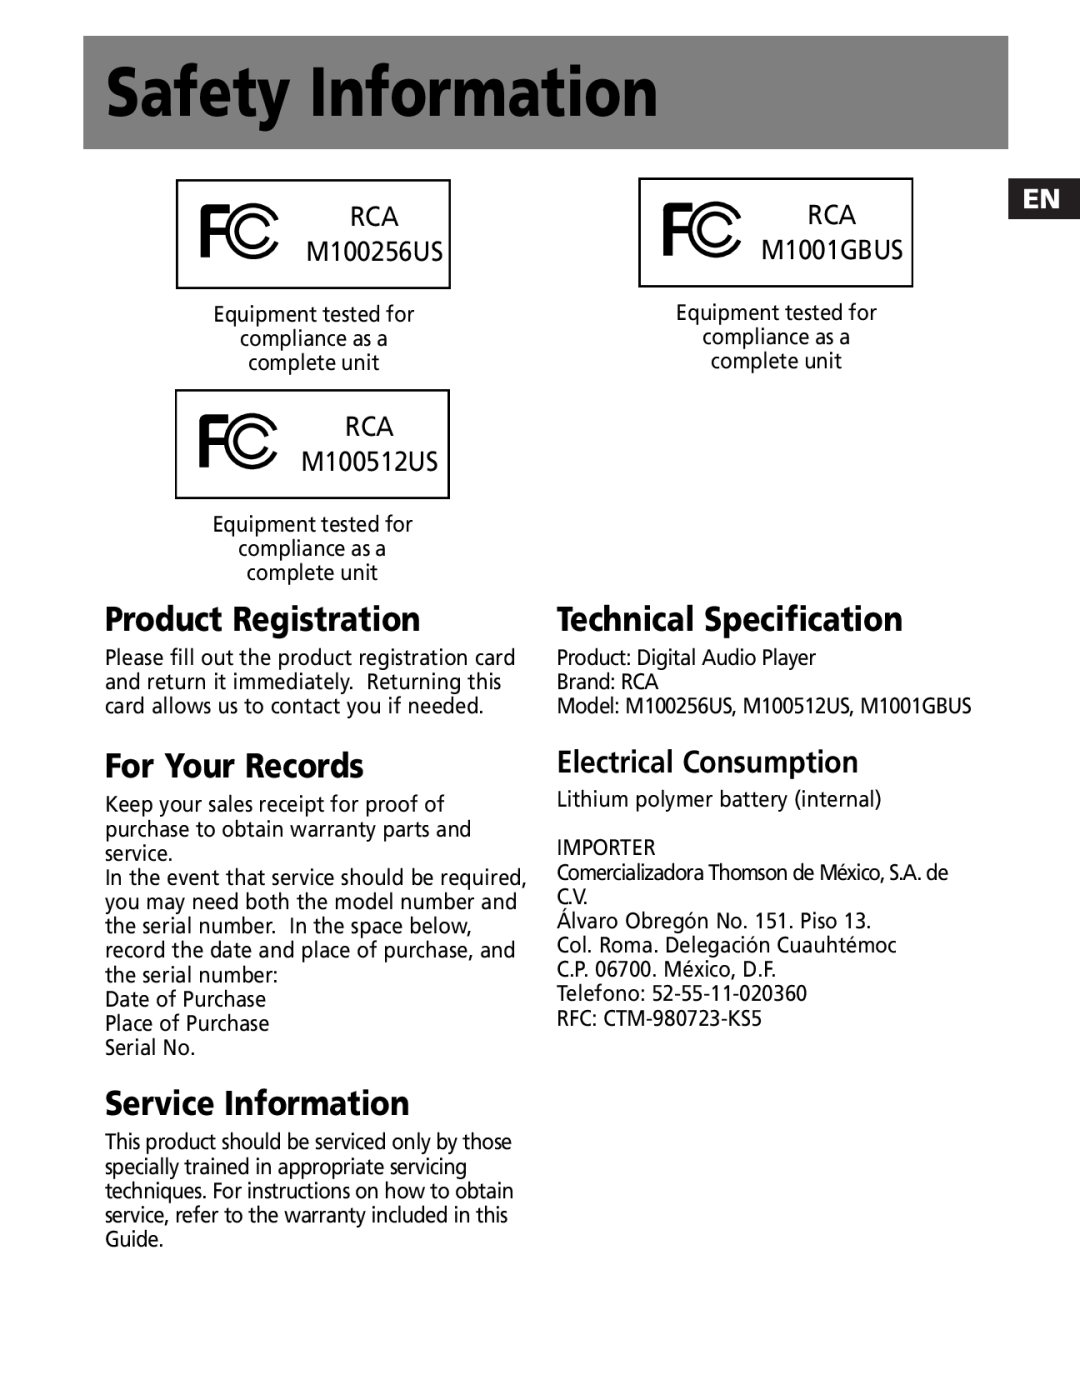 RCA M100256 Safety Information, Product Registration, Technical Specification, For Your Records, Service Information 